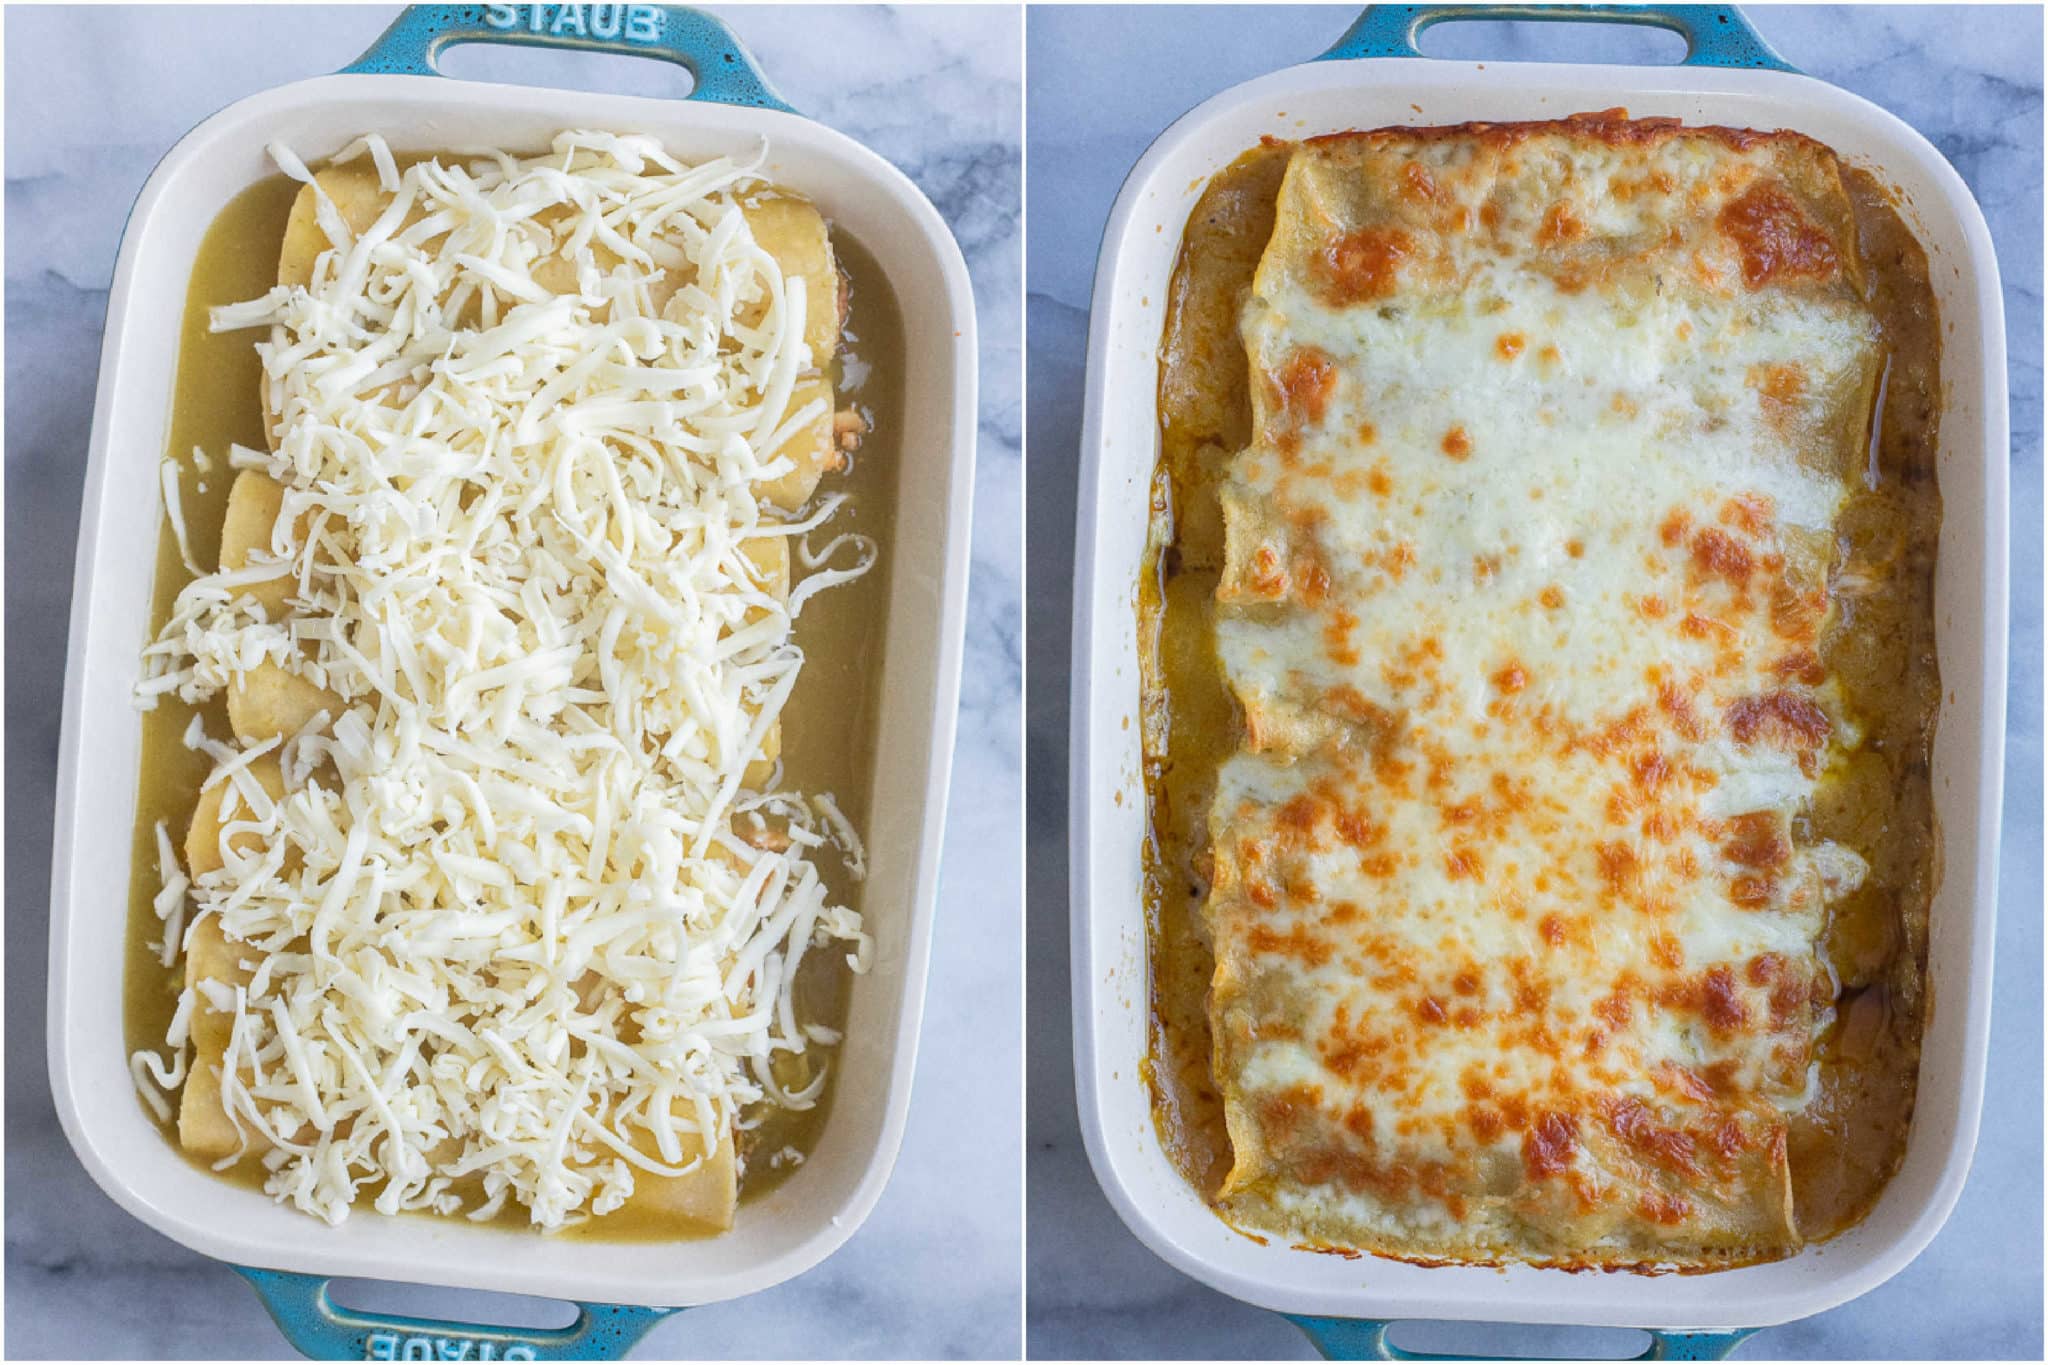 green Chile enchiladas before and after they've been baked in the oven